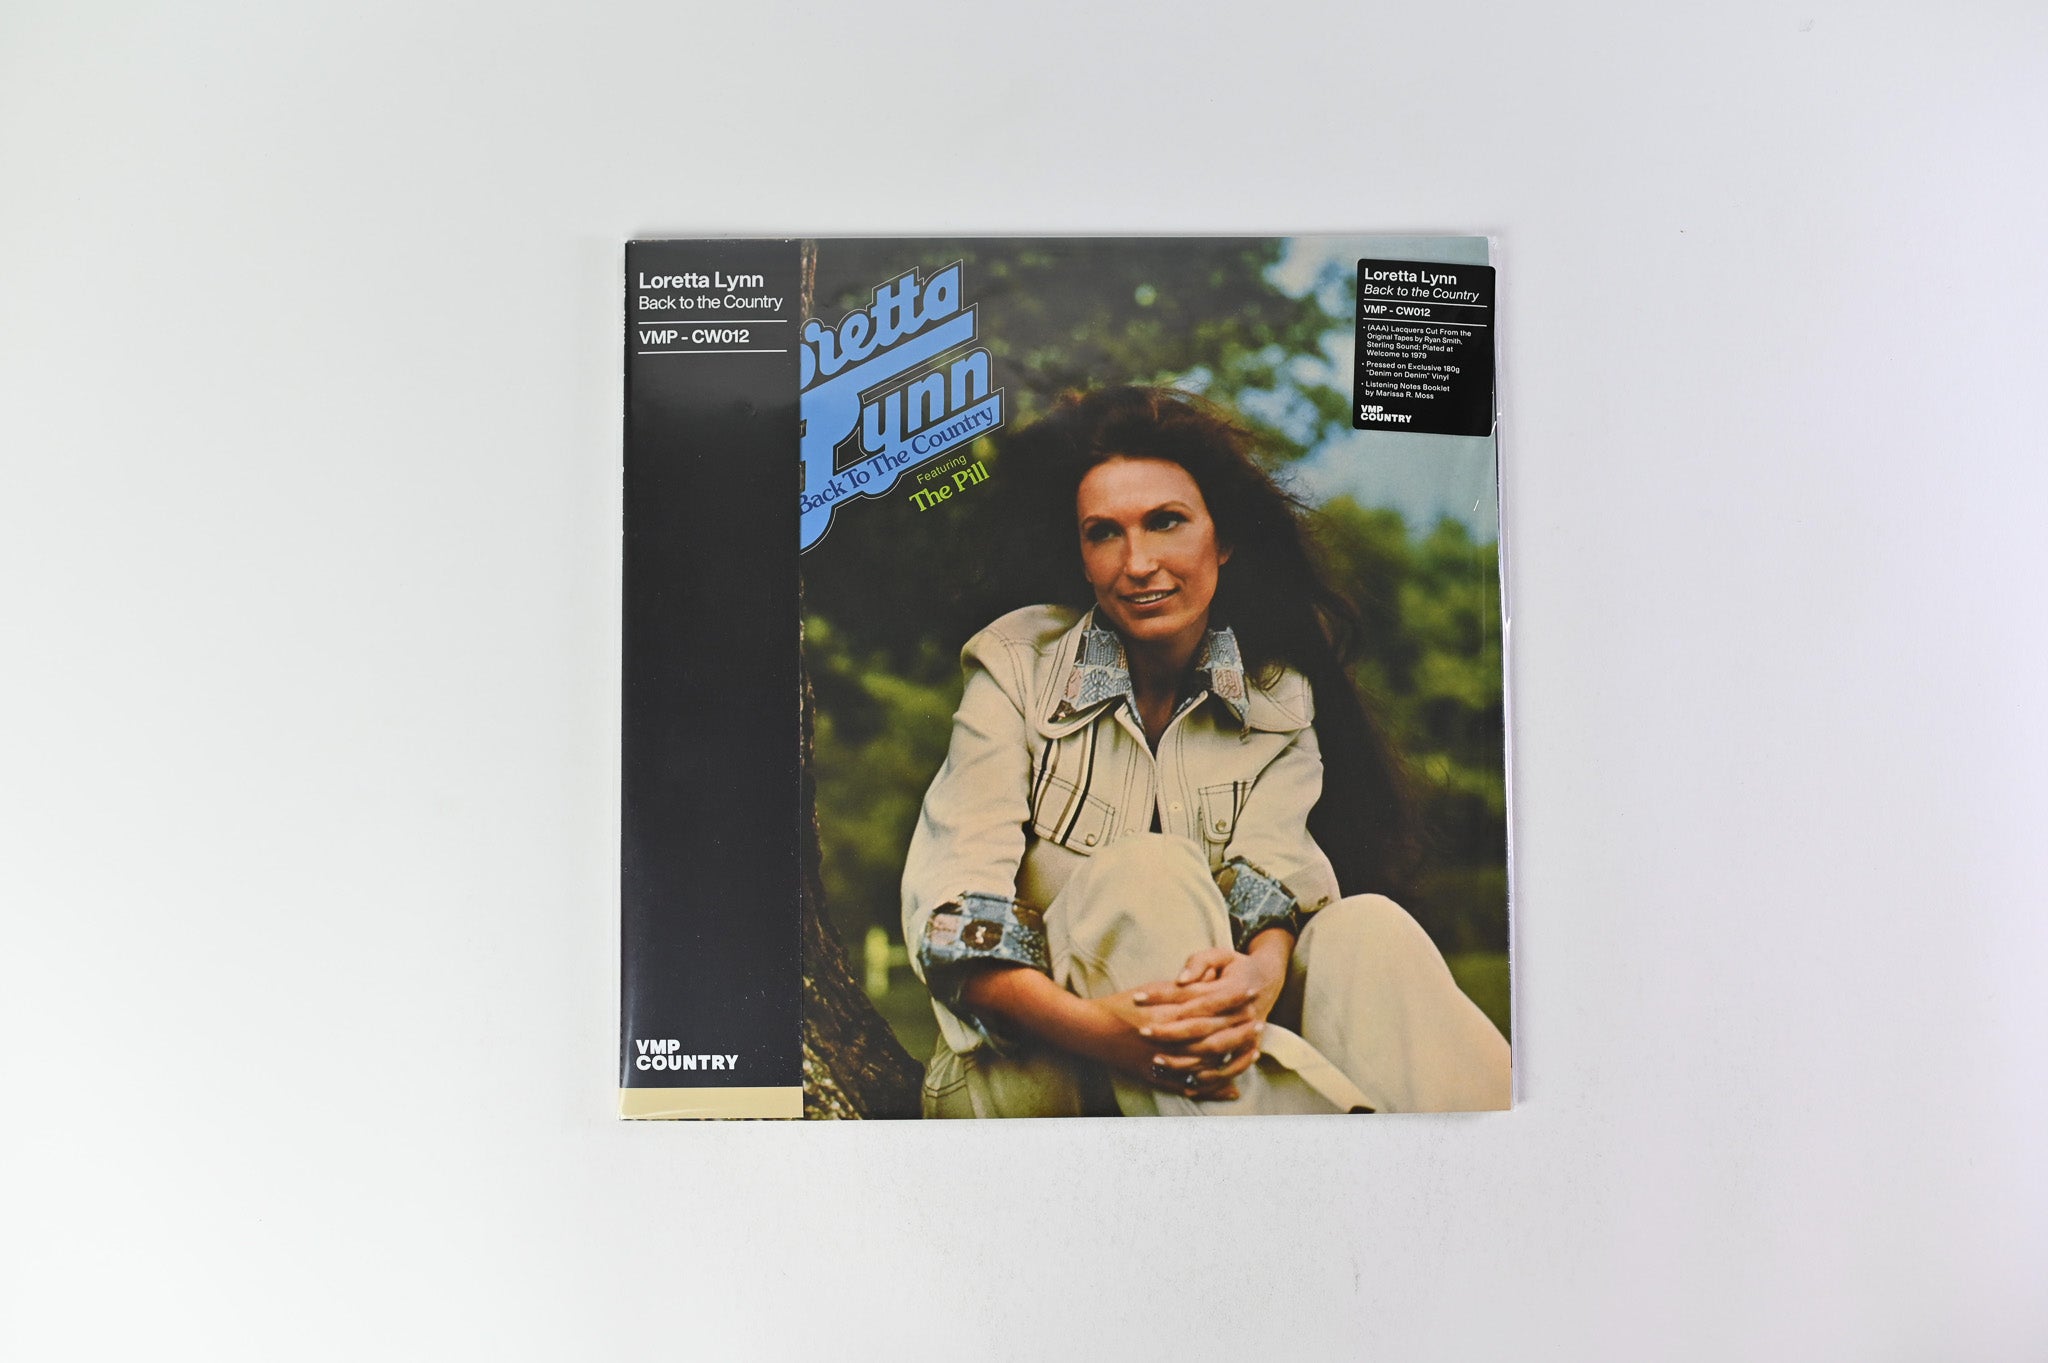 Loretta Lynn - Back to the Country on MCA Records / Vinyl Me, Please - Colored Vinyl